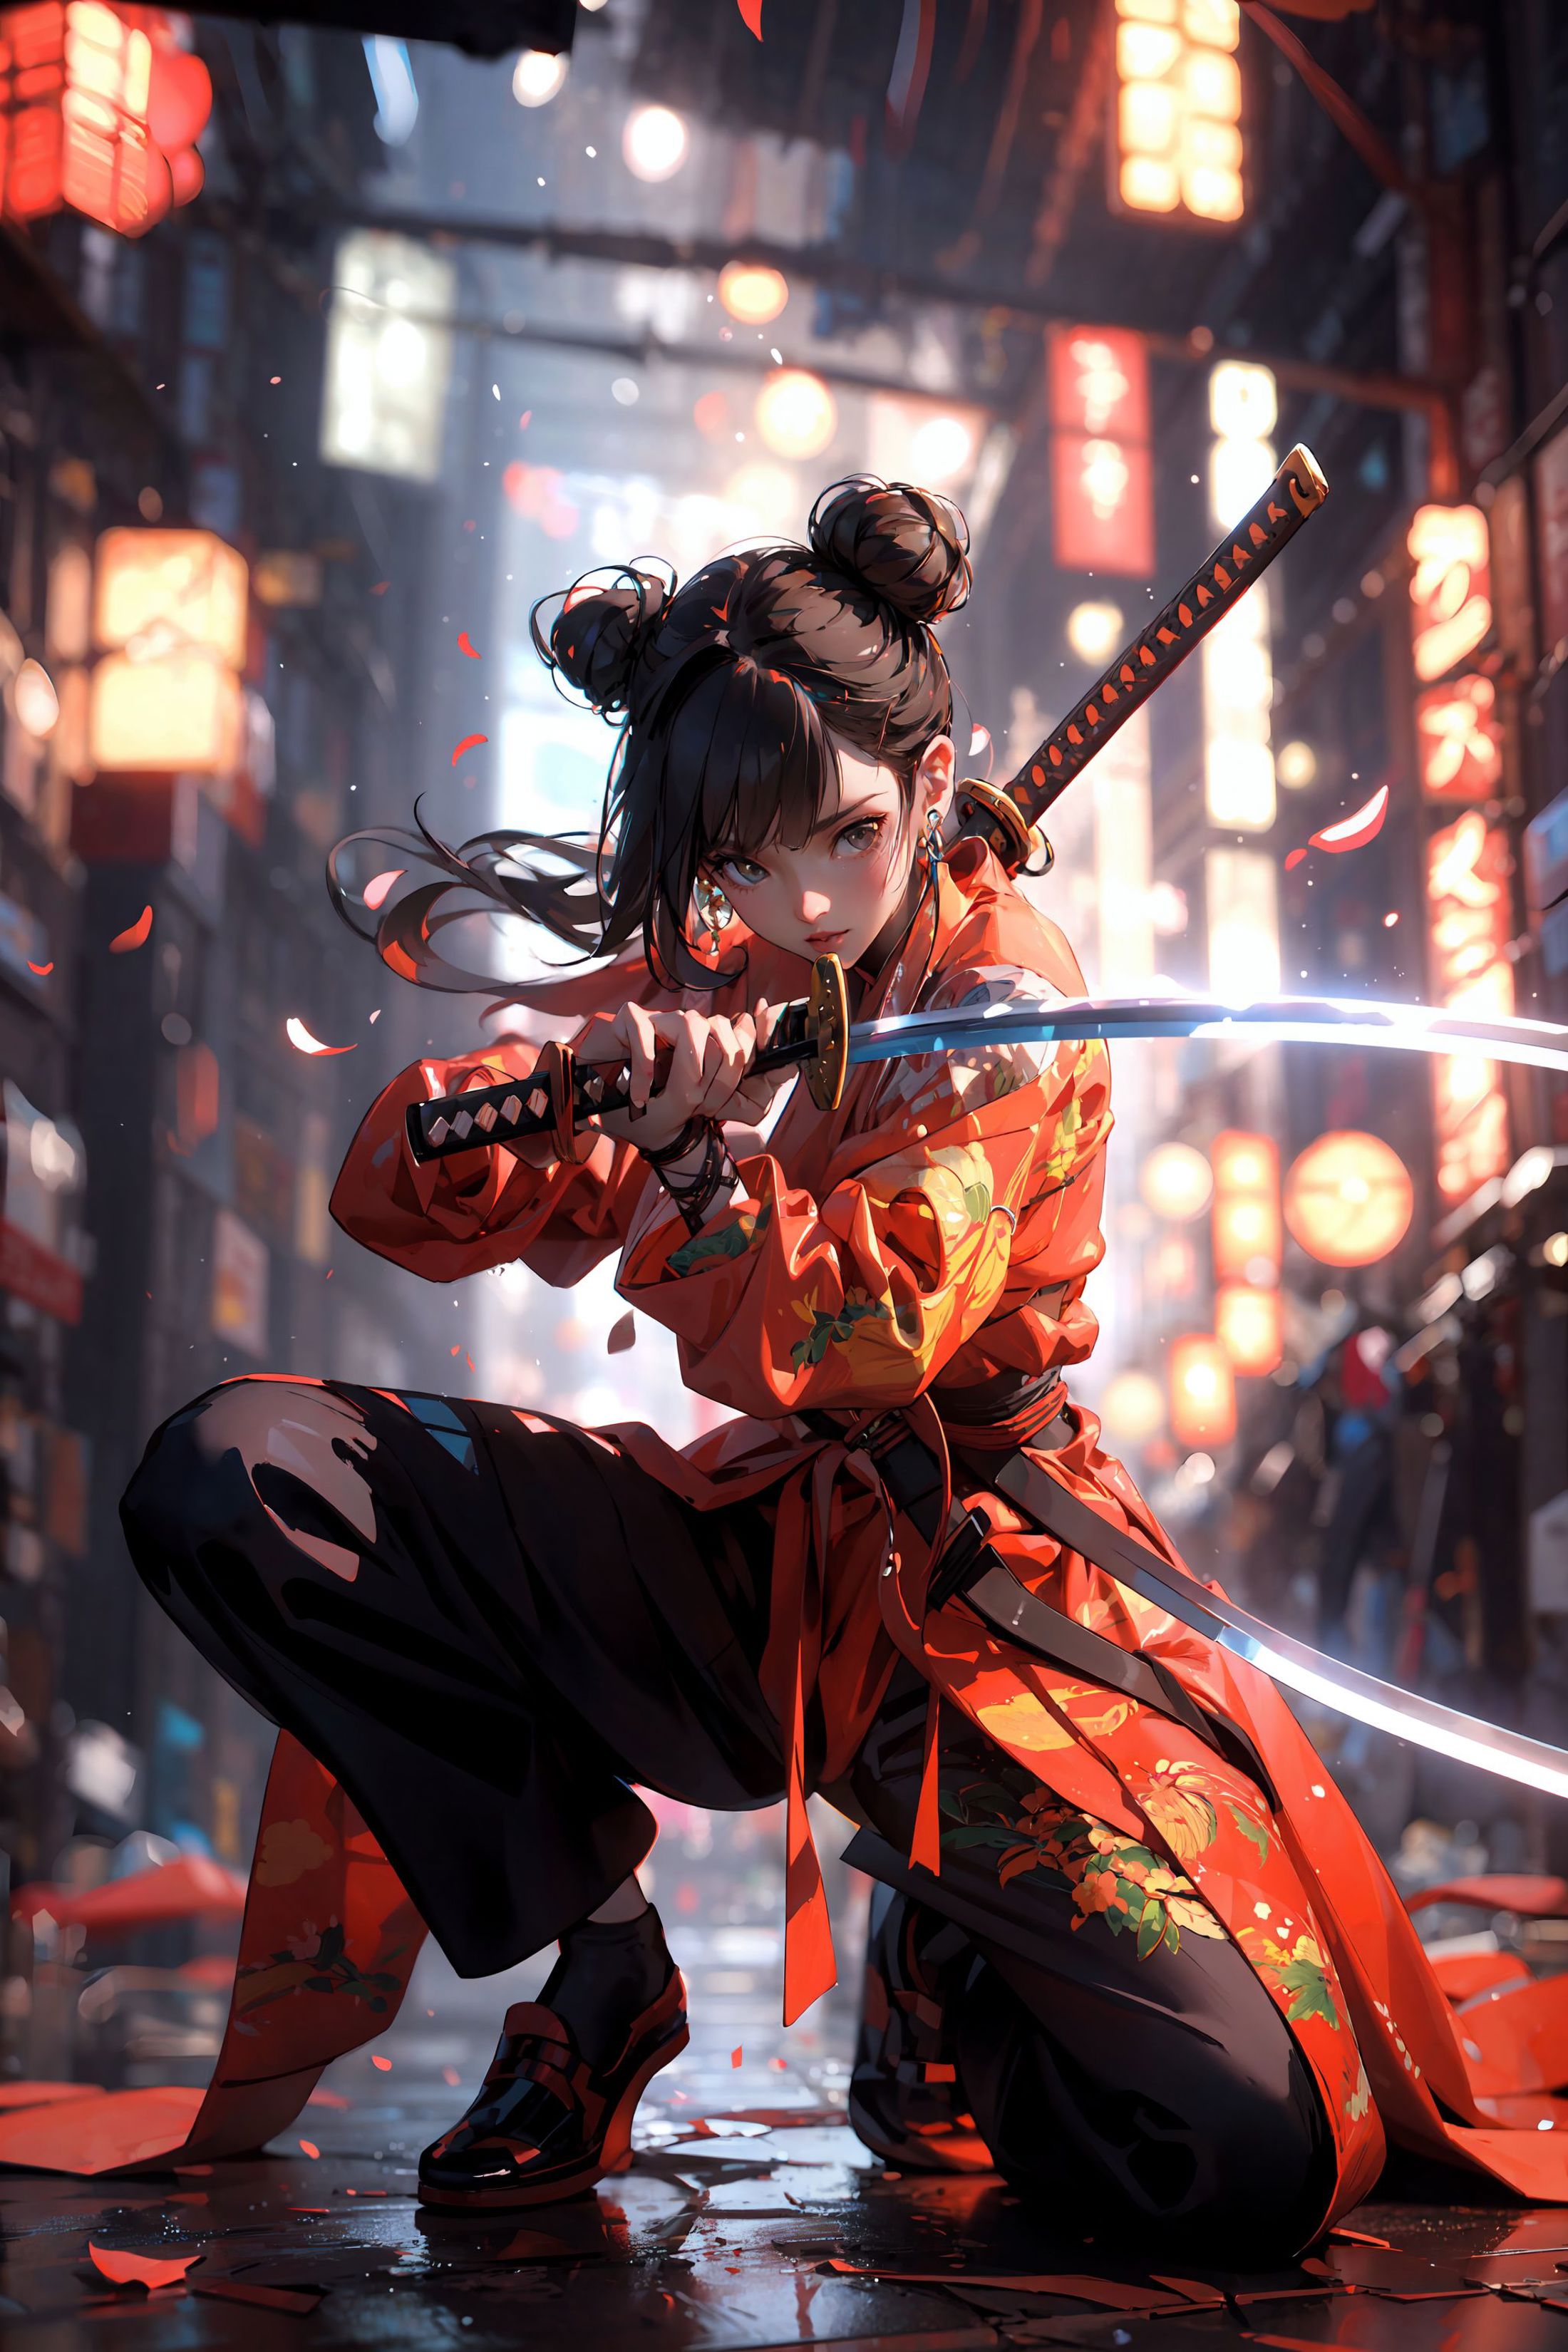 Anime-style girl in a red kimono, holding a sword in a cityscape.